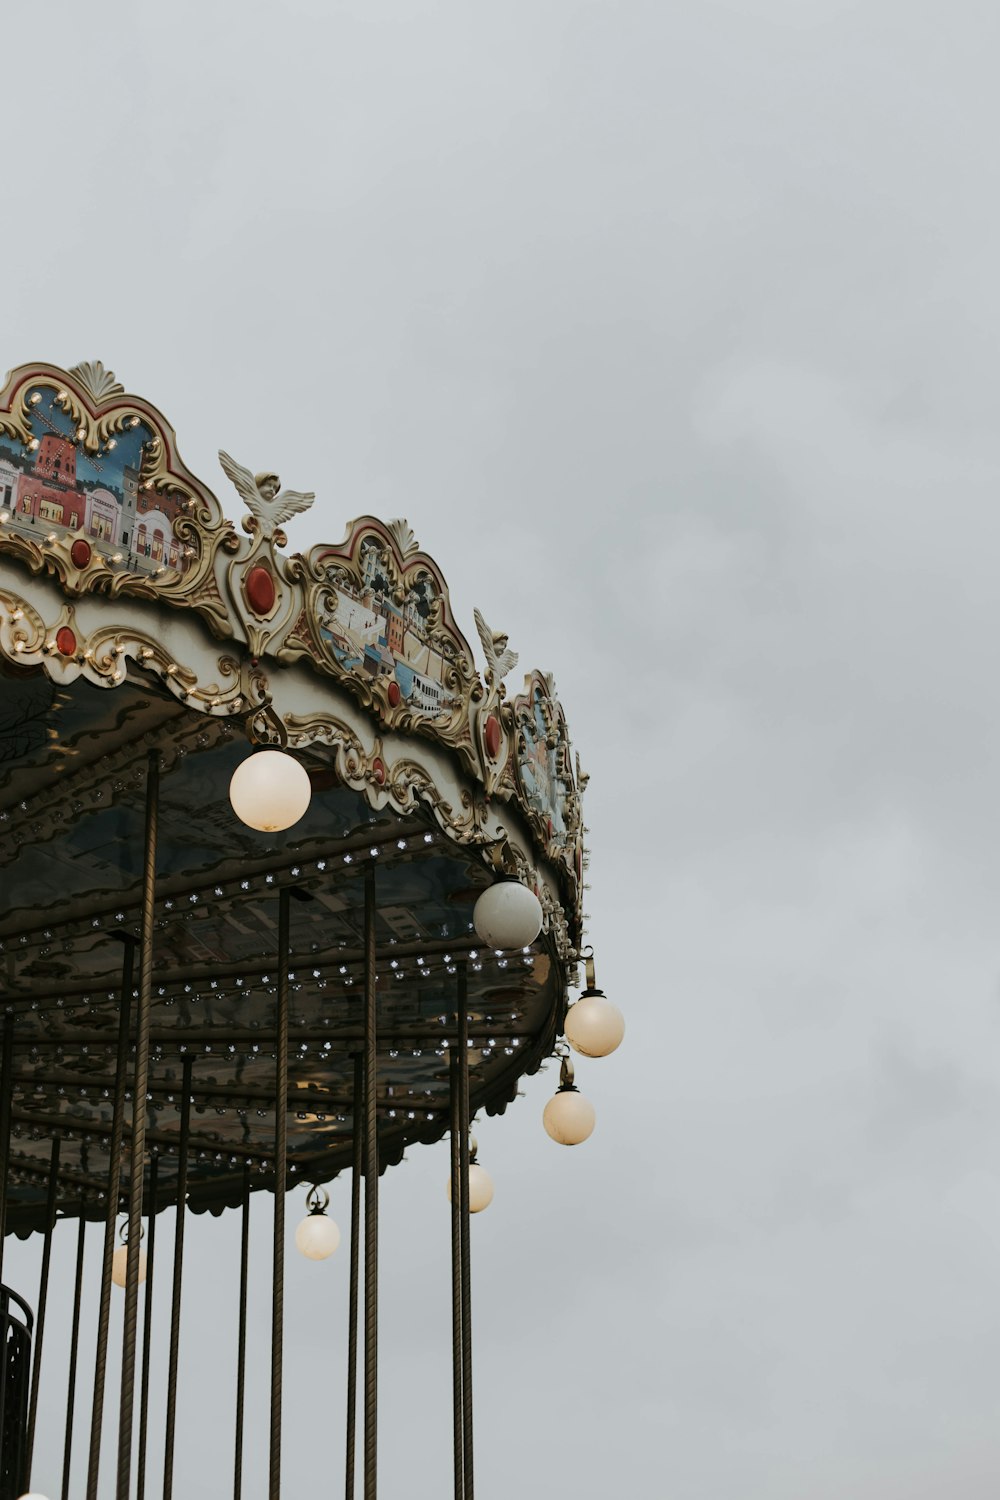 a close up of a merry go round on a cloudy day